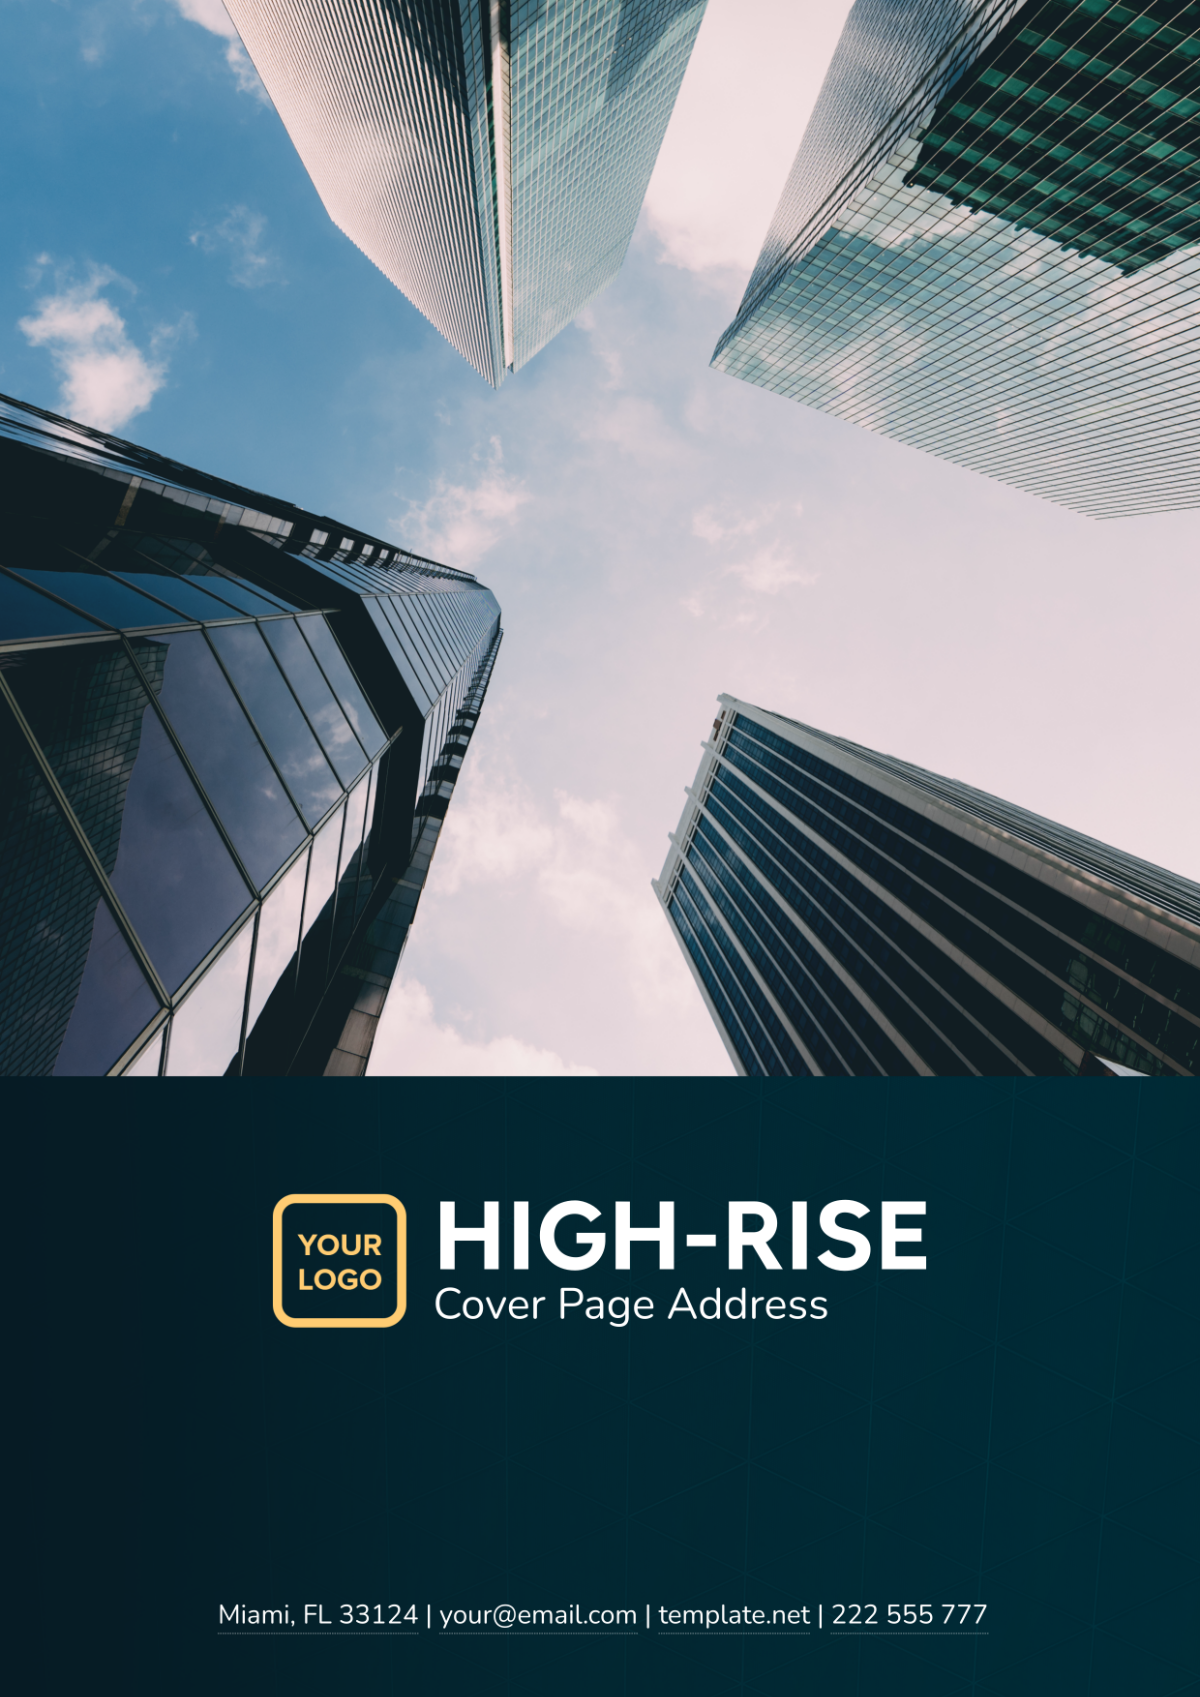 High-Rise Cover Page Address